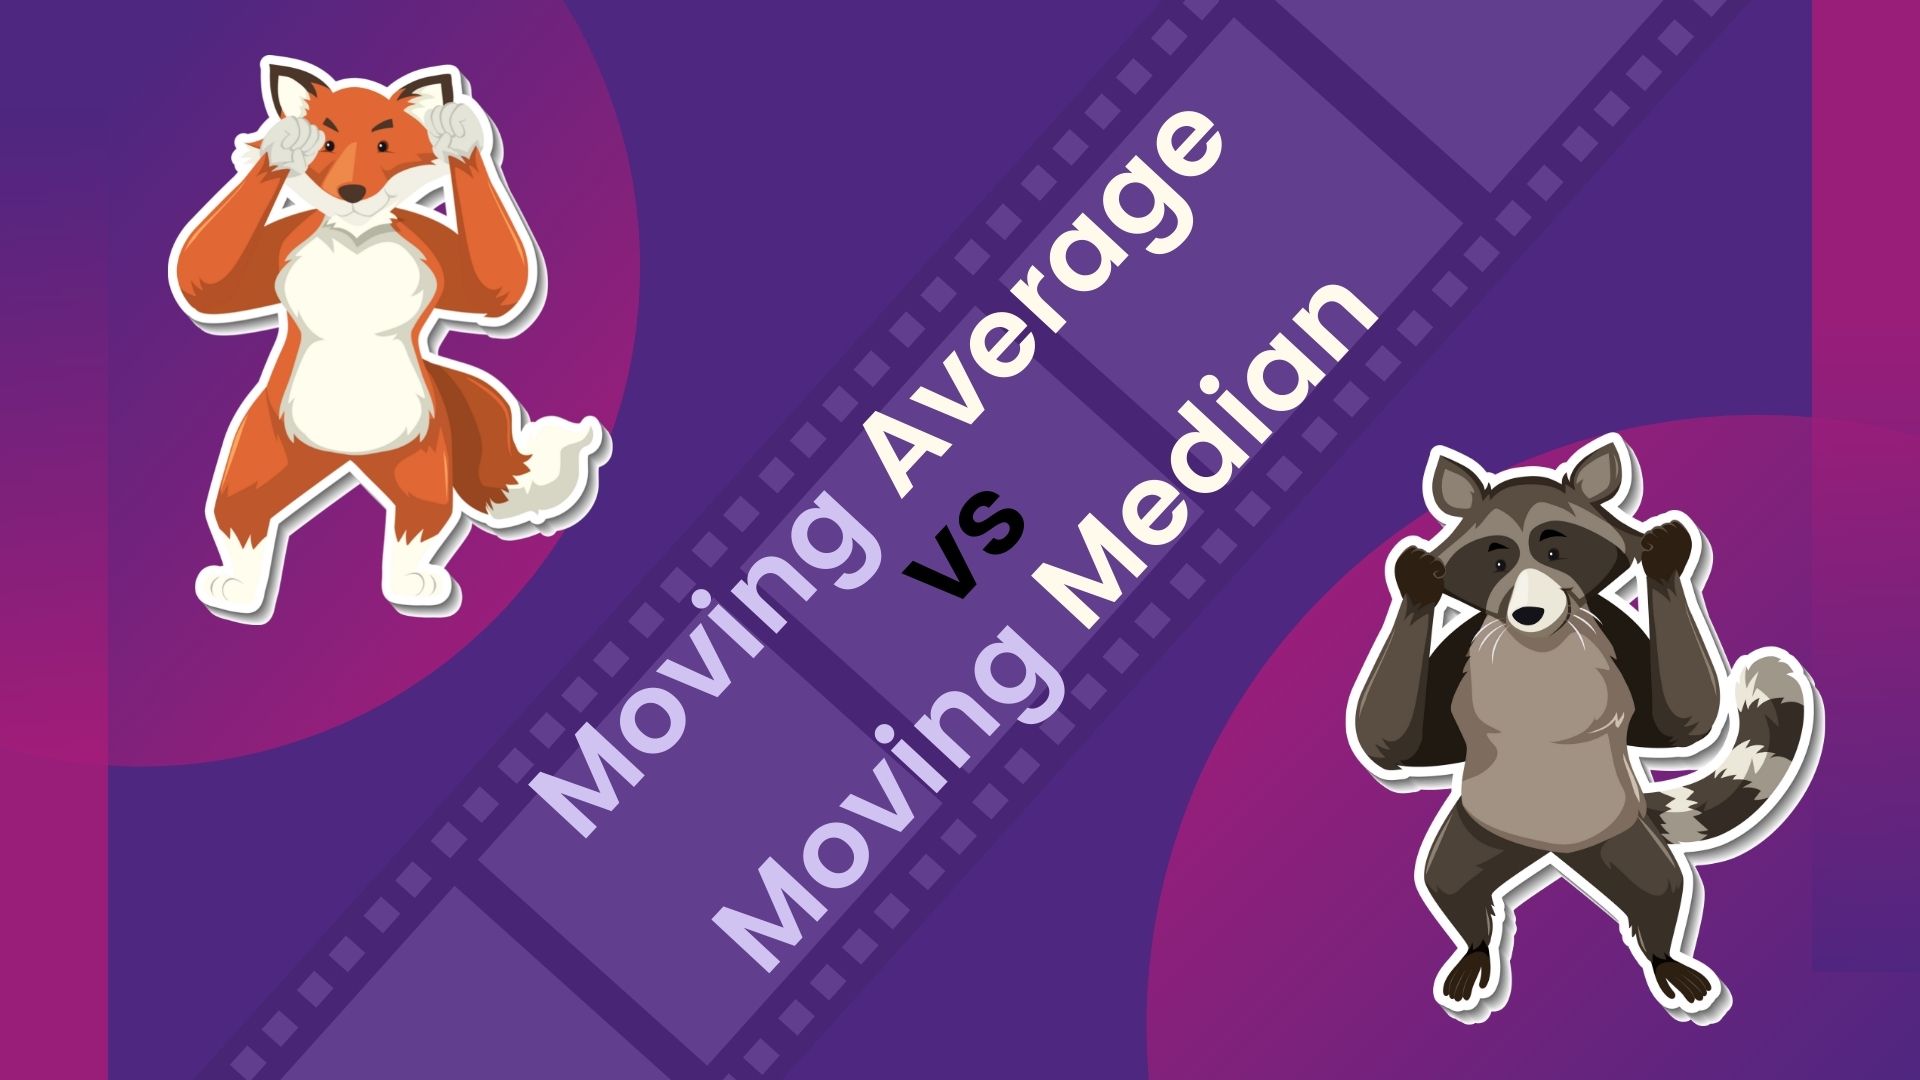 Moving Mean or Moving Median. Decorative image with the title of an article.